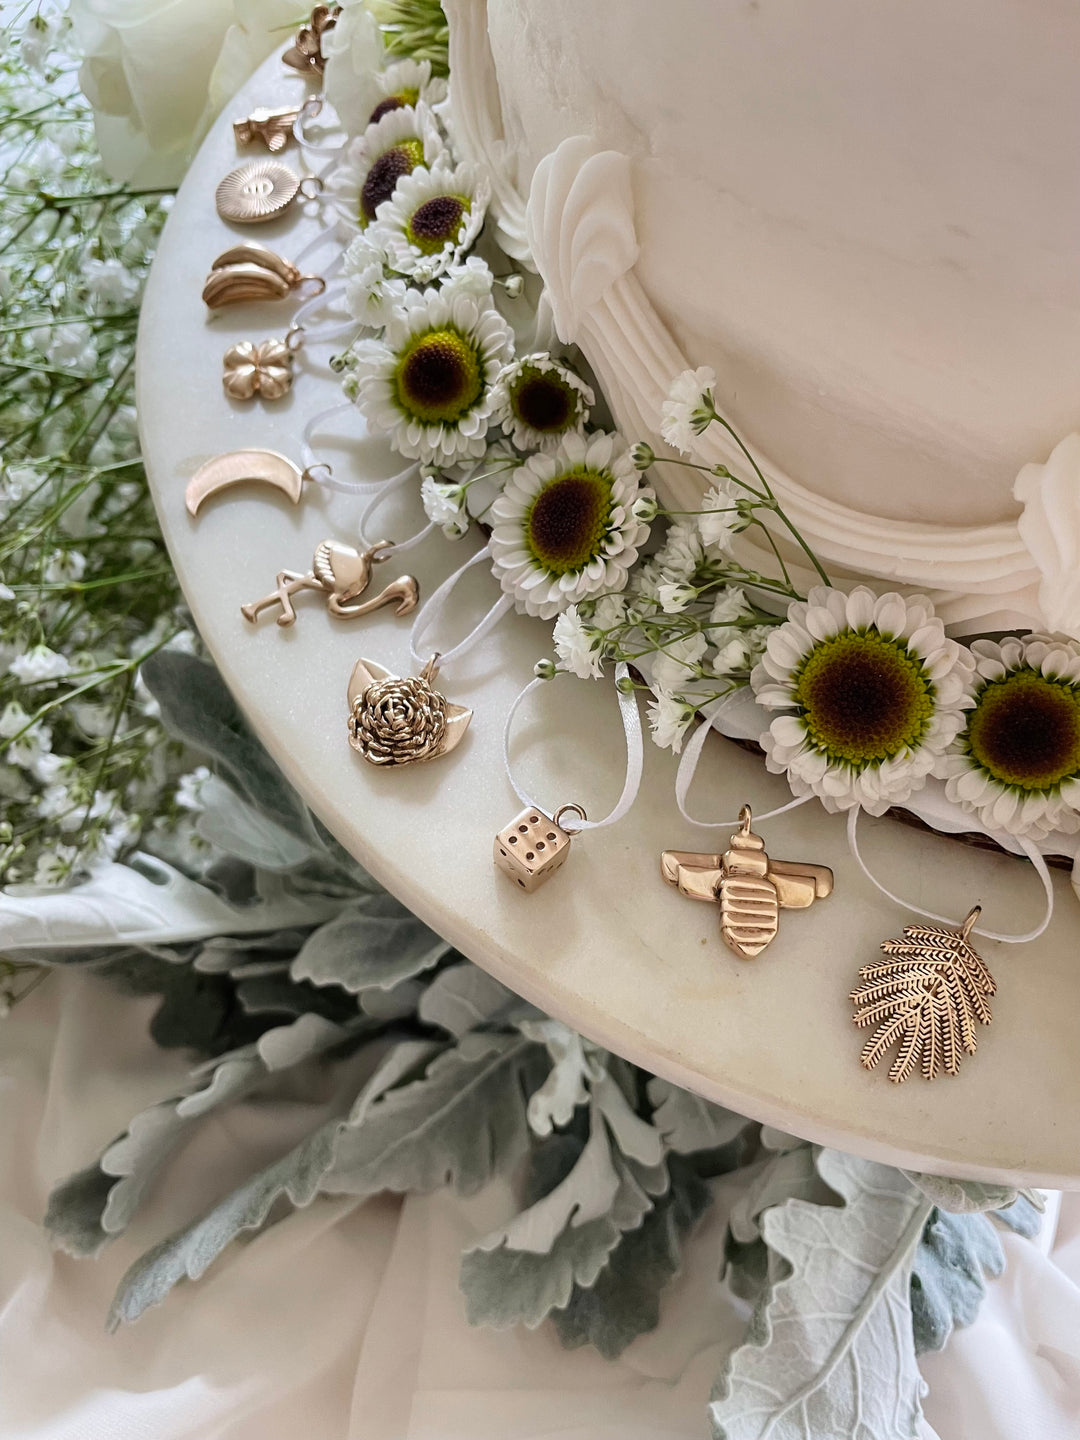 MIMOSA Handcrafted Pendants Are Used As Wedding Cake Pulls